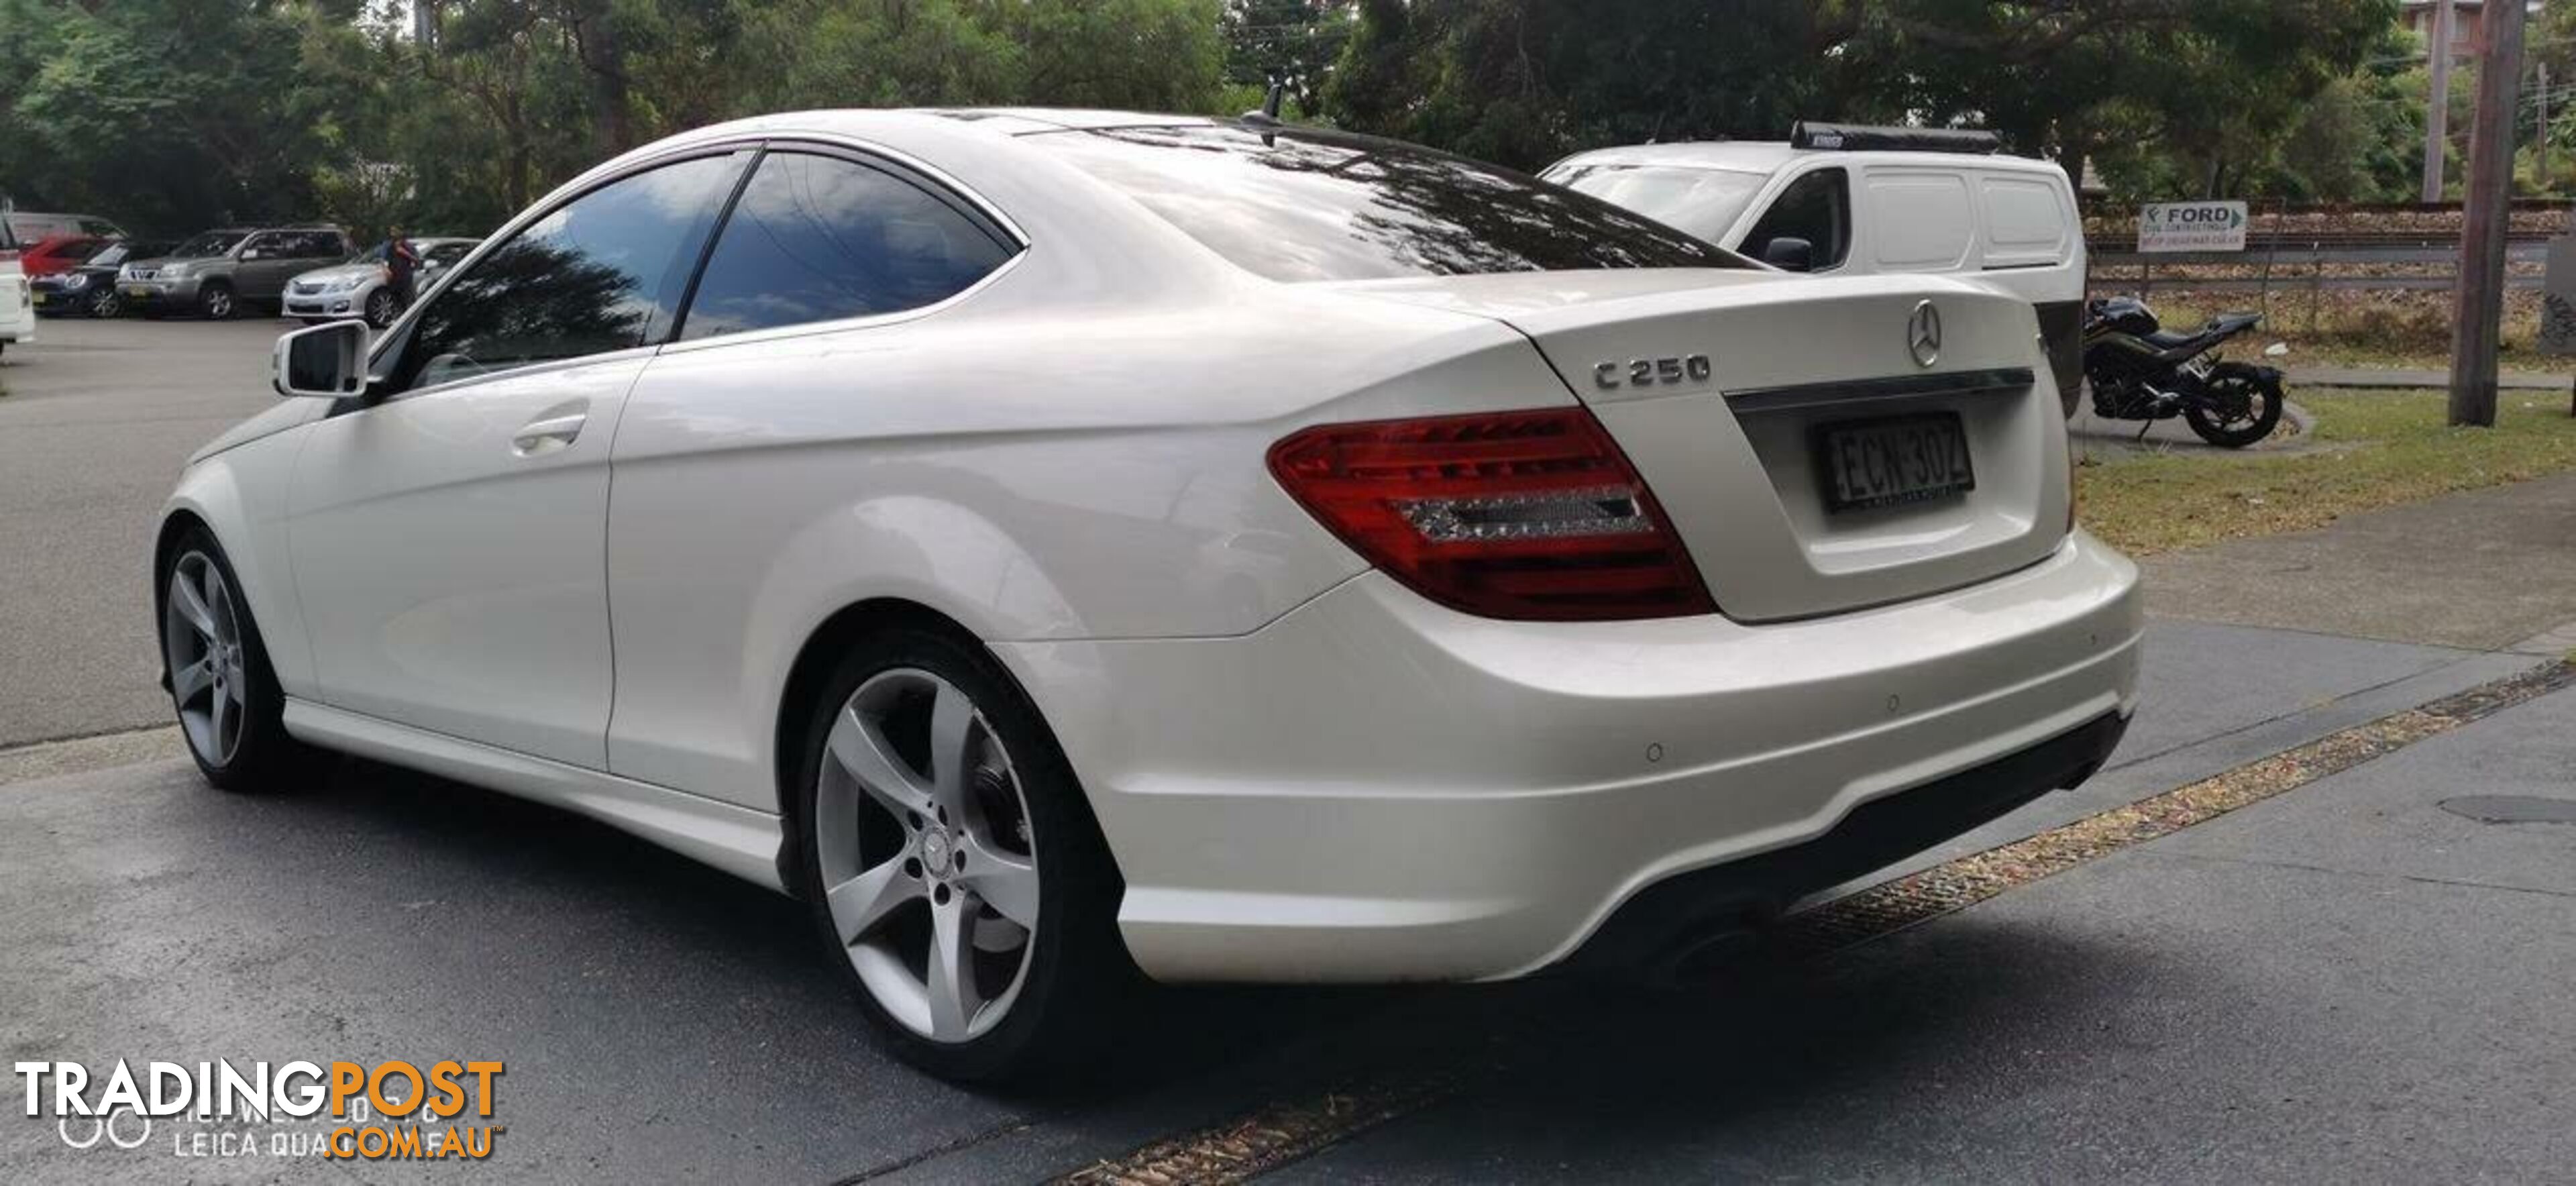 2014 MERCEDES-BENZ C250 CDI W204 MY14 COUPE